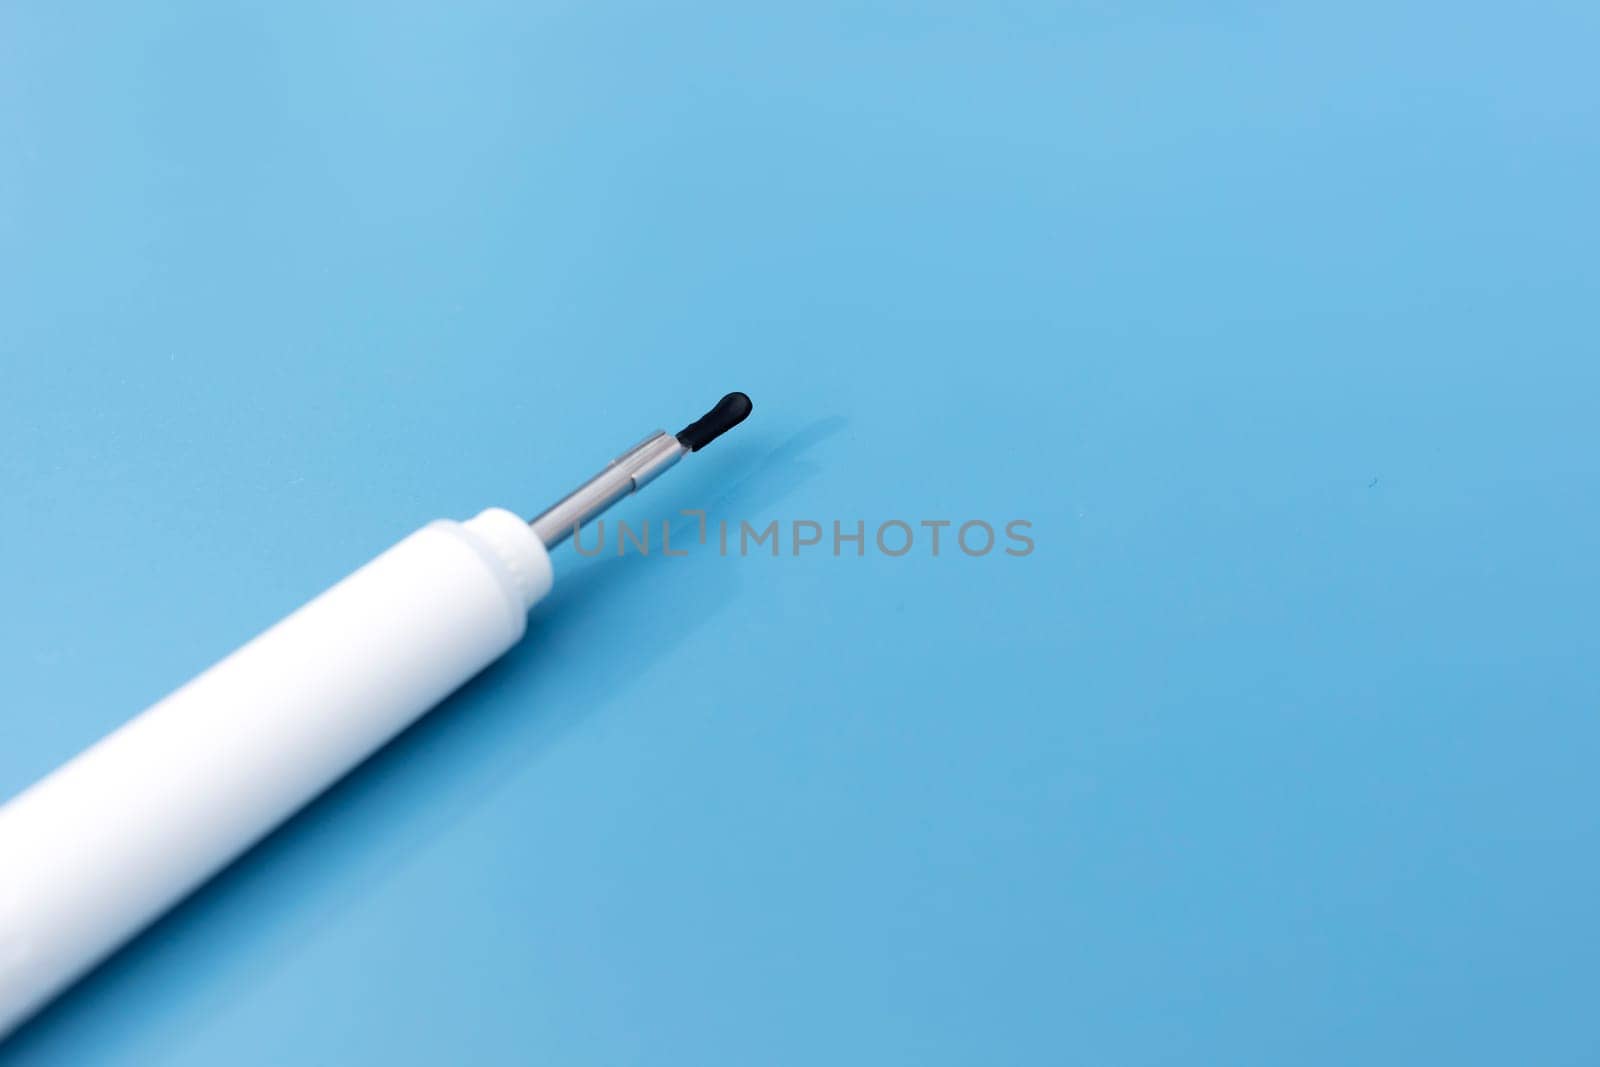 Template Ear Scope For Wax Removal Tool on Blue Background. Digital Otoscope, Earwax Cleaner With Gyroscope, Camera, Light. Copy Space. Cleaning Ears Device Connected to Smartphone Technology.